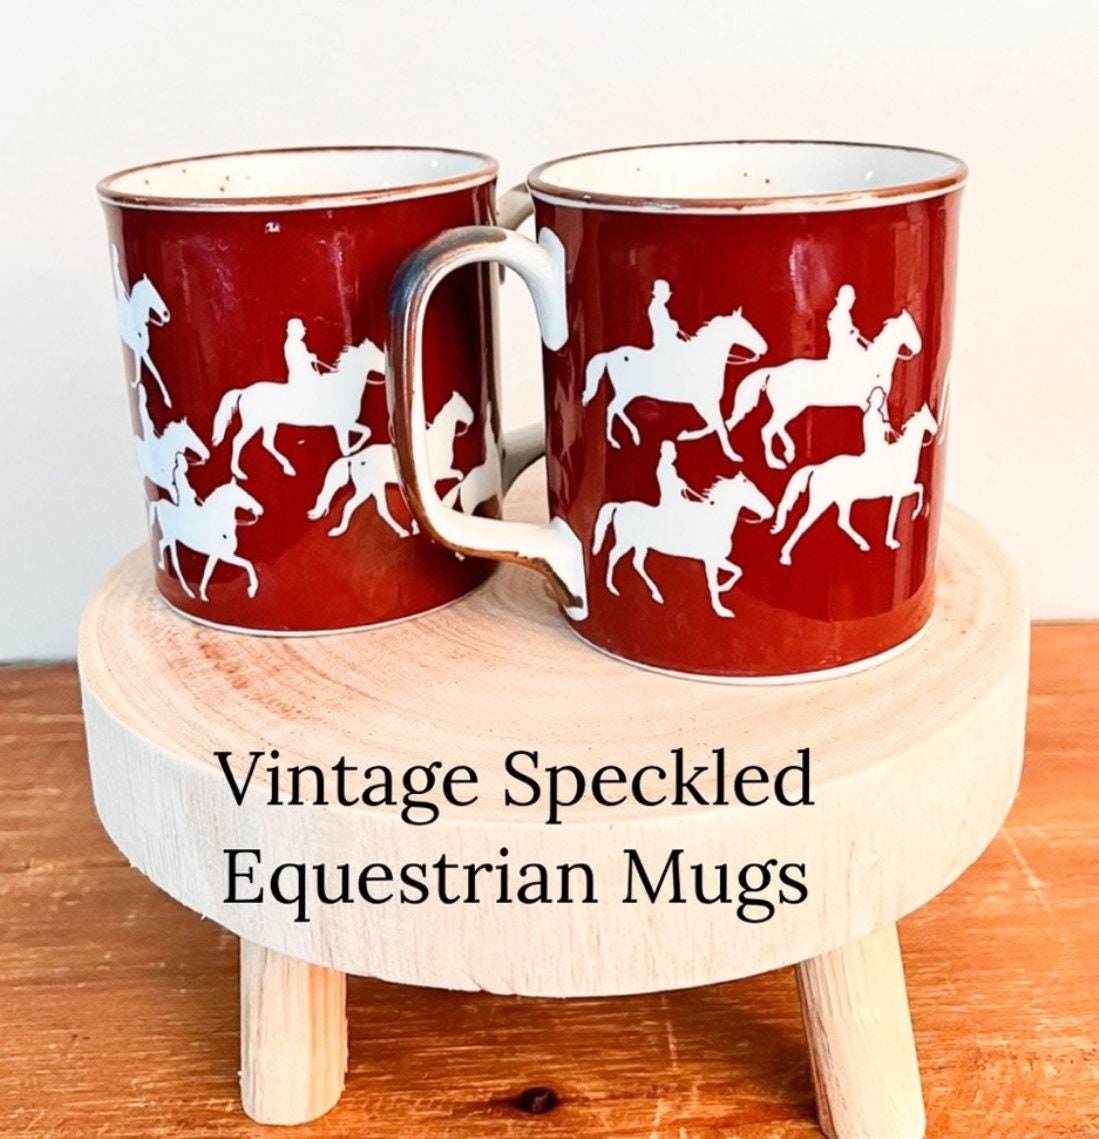 Spotted Dog Gift Company Horse Coffee Mug Set of 4, Cute Mugs 12oz Ceramic Porcelain Coffee Tea Cups, Horse Lovers Gifts for Women Men and